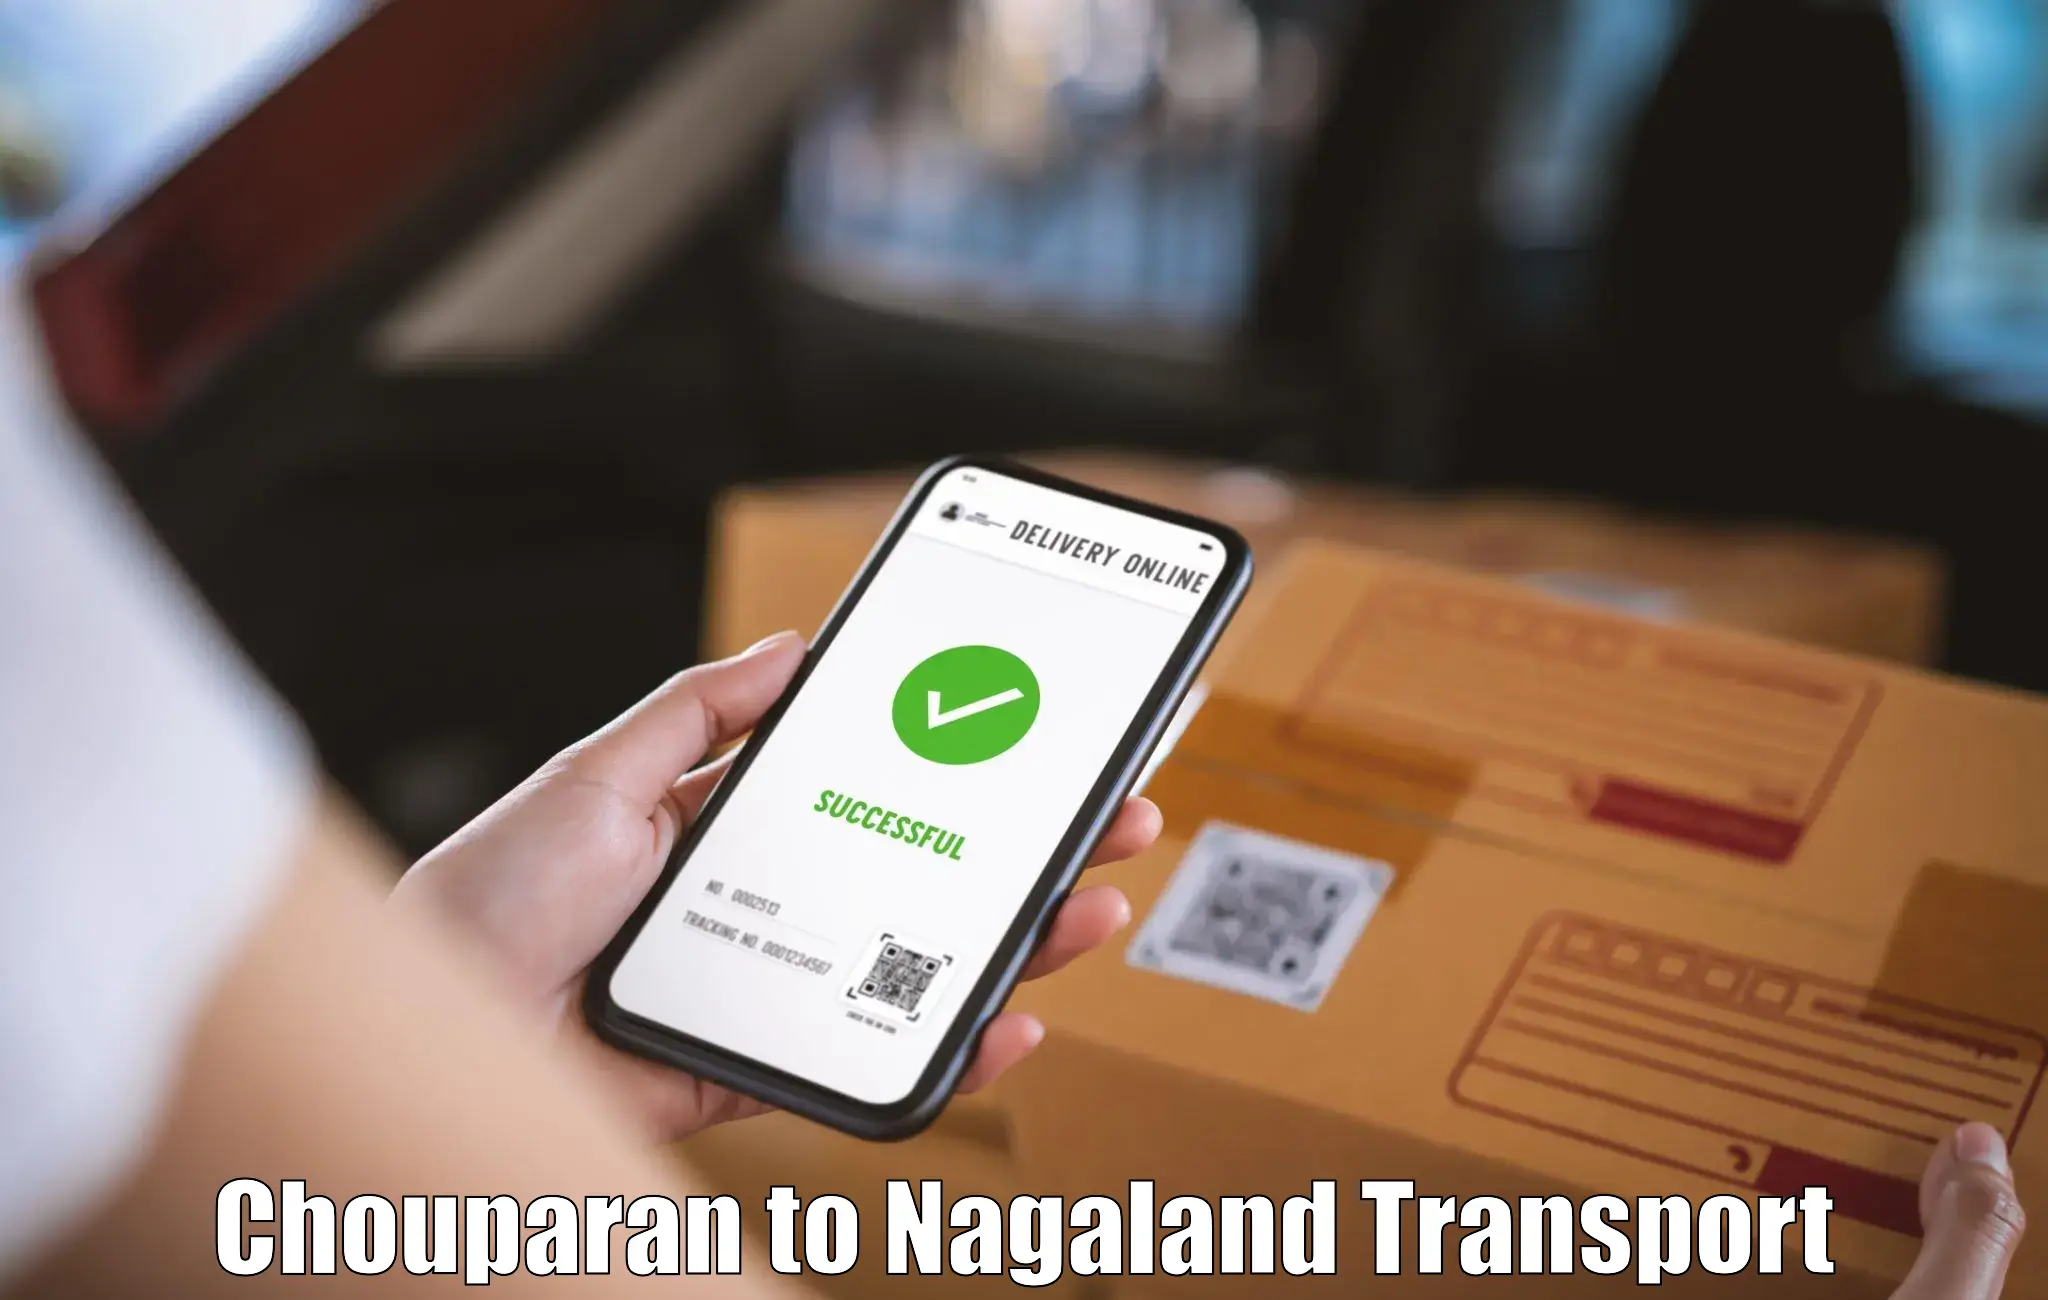 Intercity goods transport in Chouparan to Nagaland